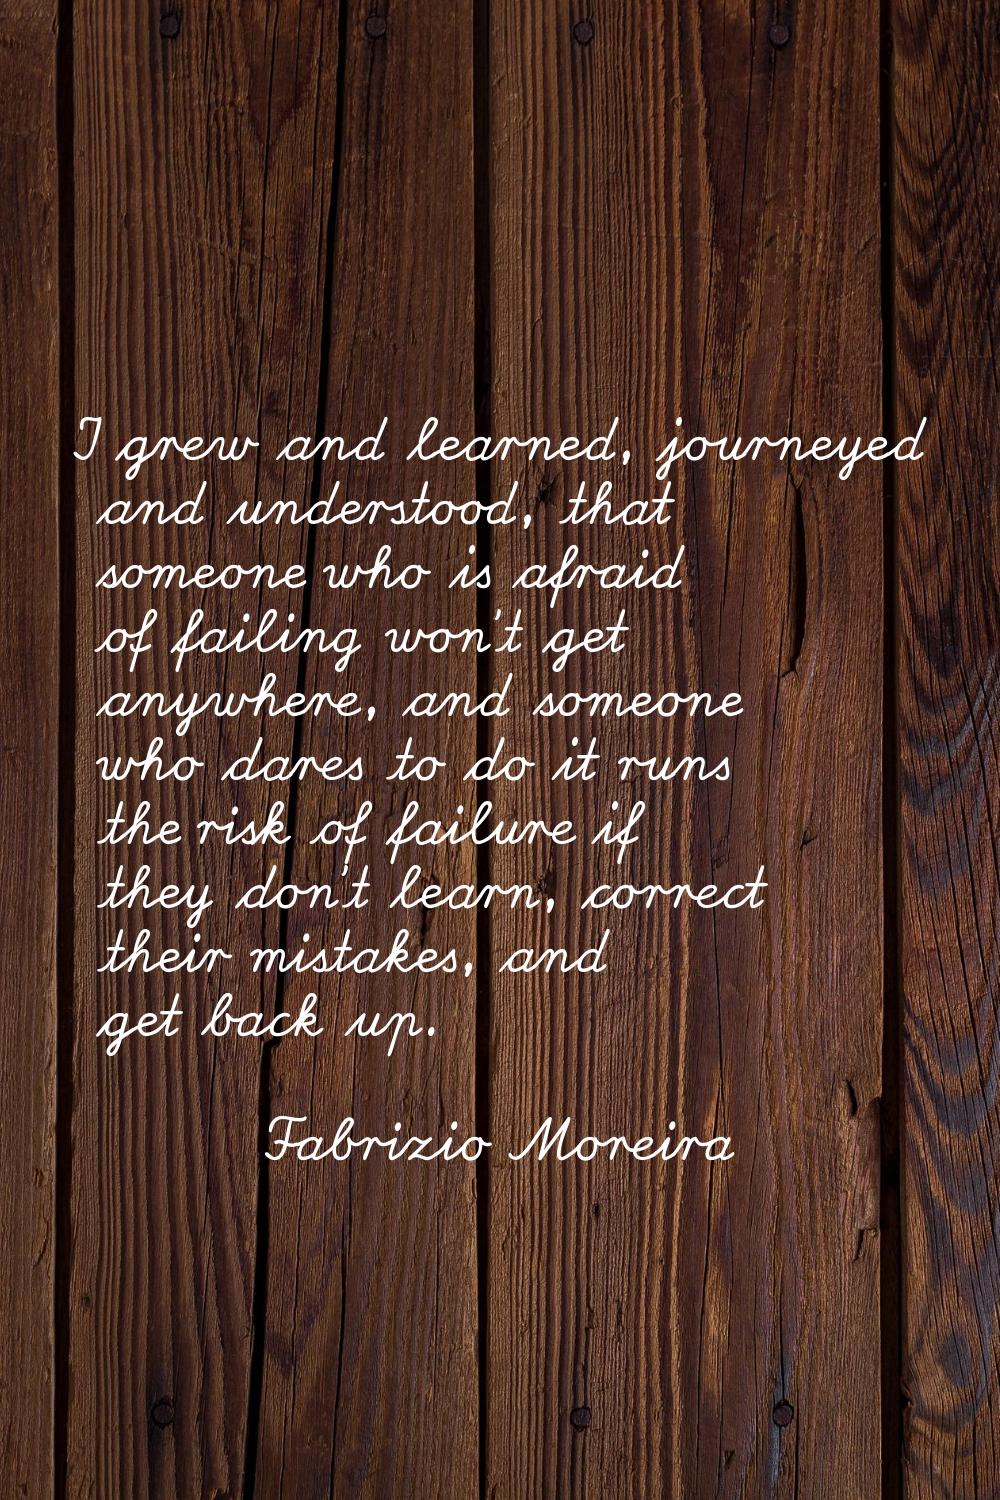 I grew and learned, journeyed and understood, that someone who is afraid of failing won't get anywh